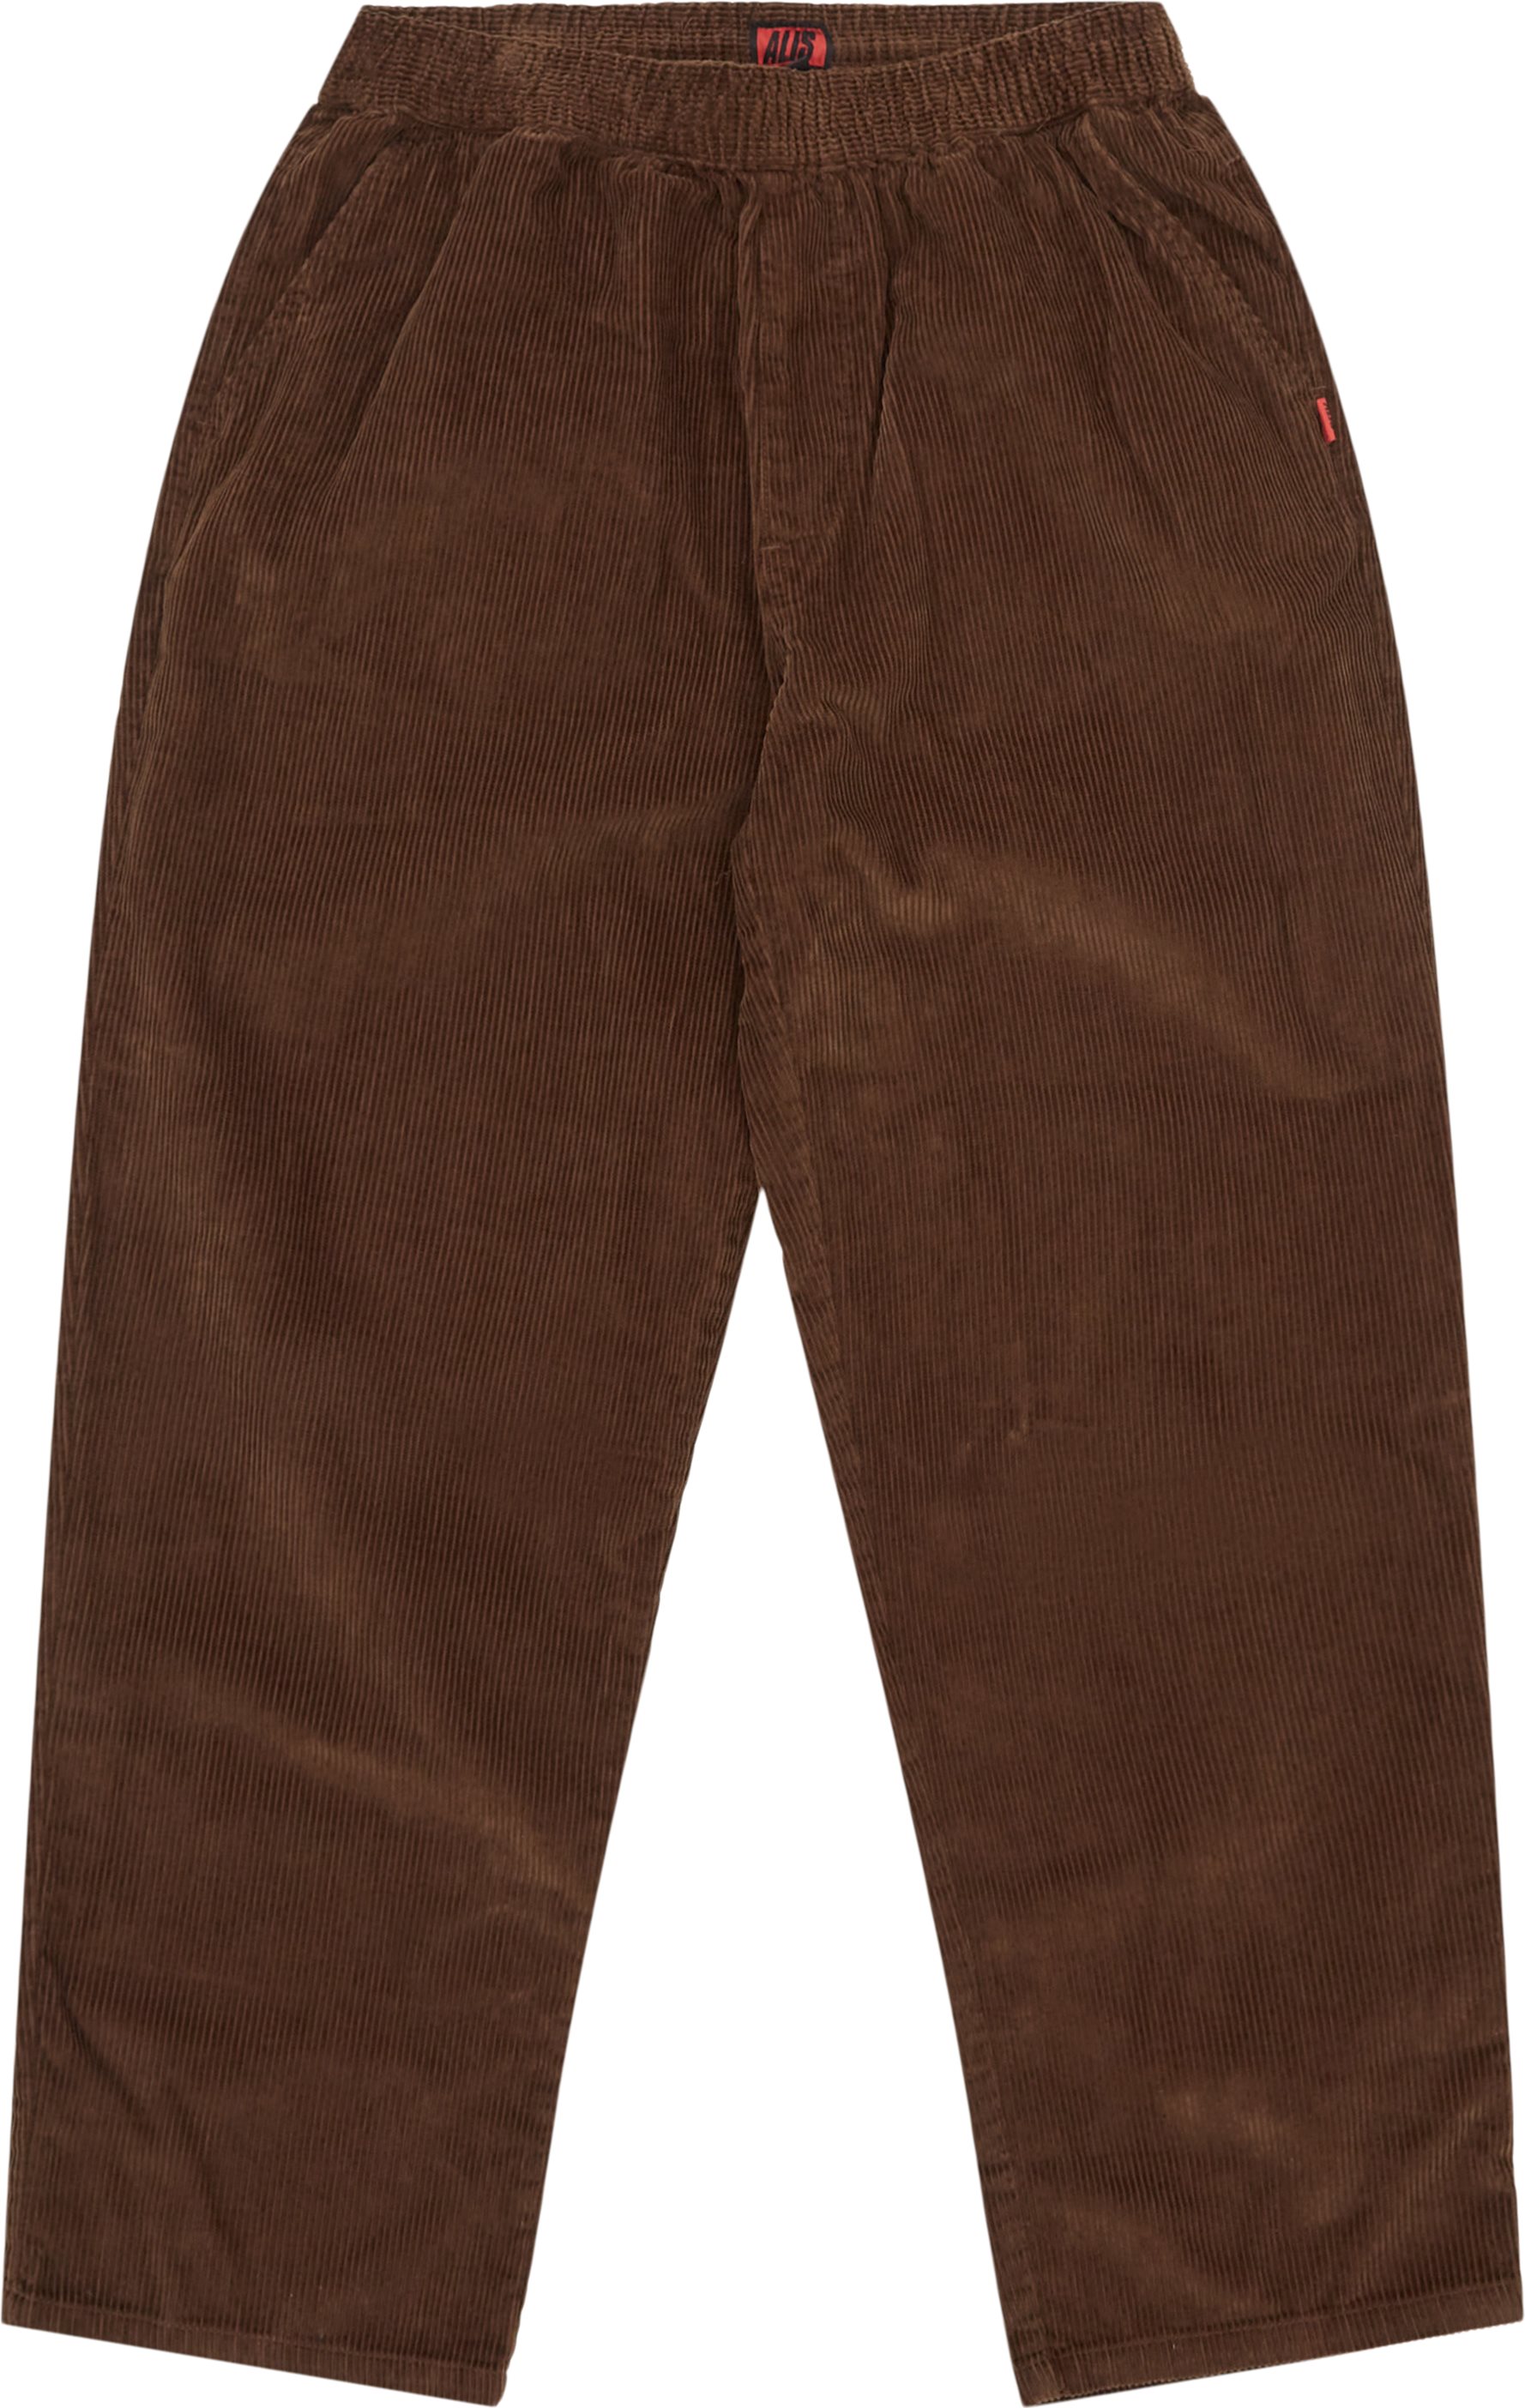 ALIS Trousers CLASSIC CORDUROY BAGGY PANT AM1015 Brown